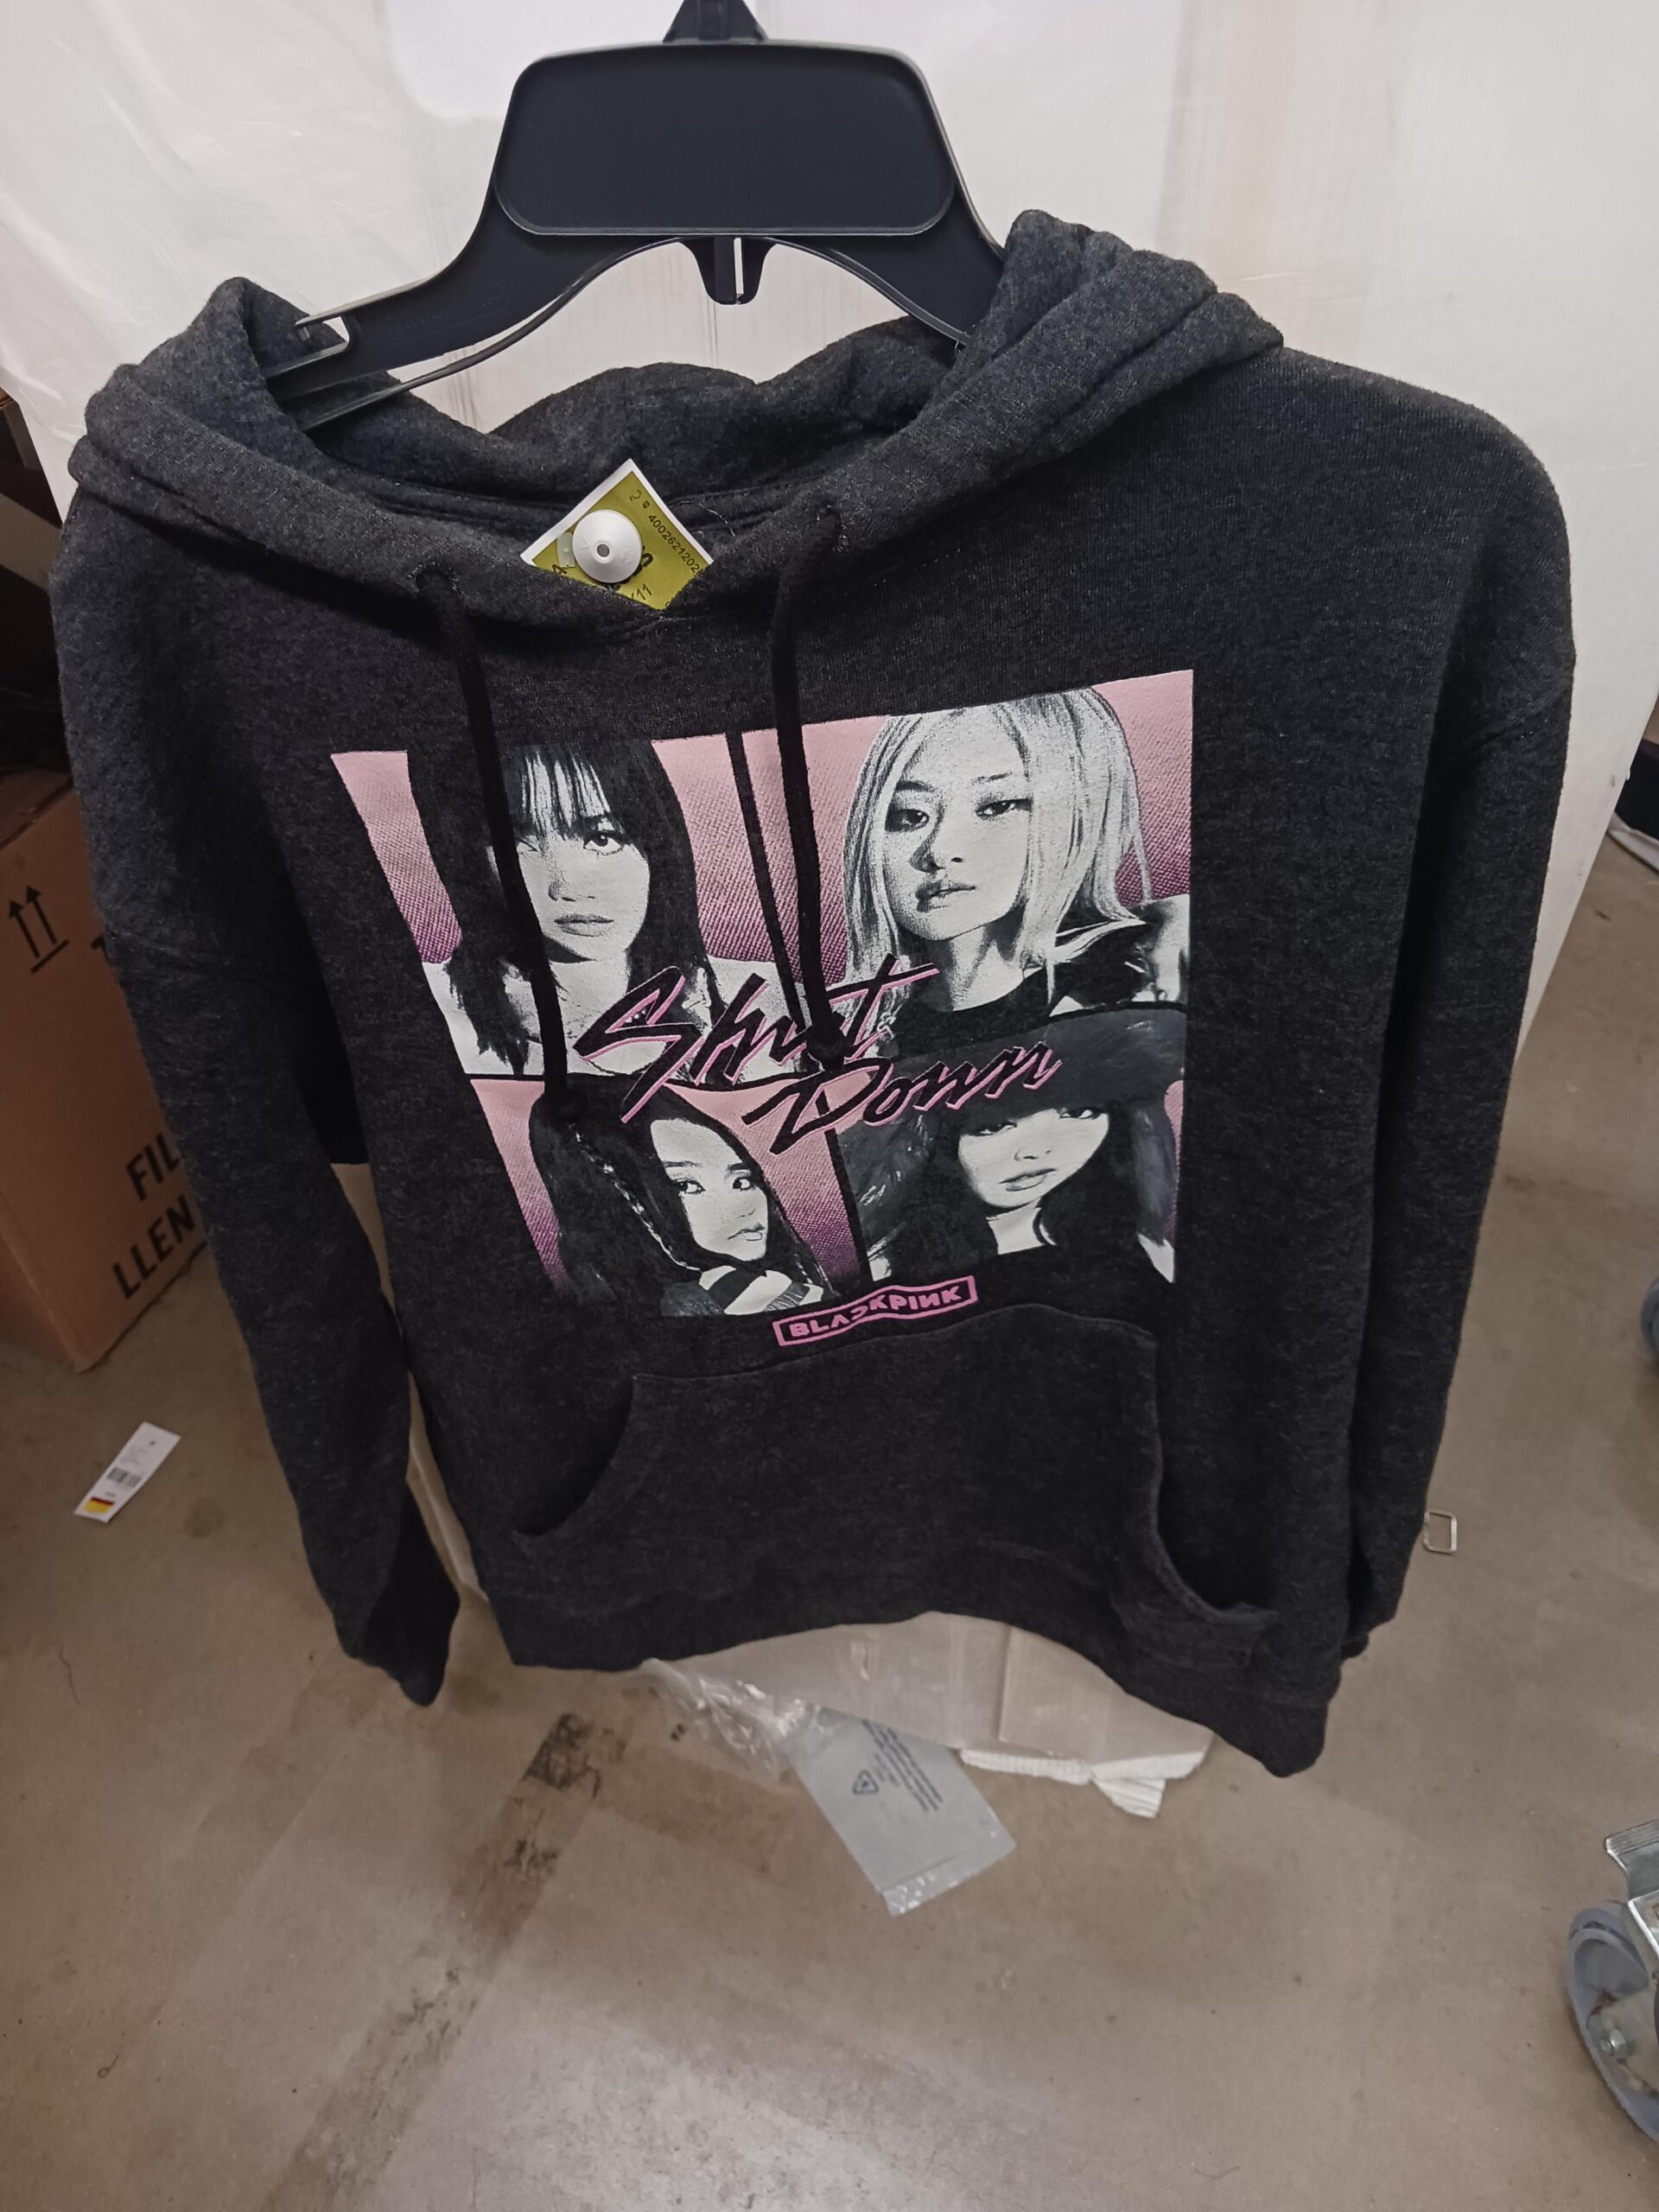 Blackpink sweater at Ross